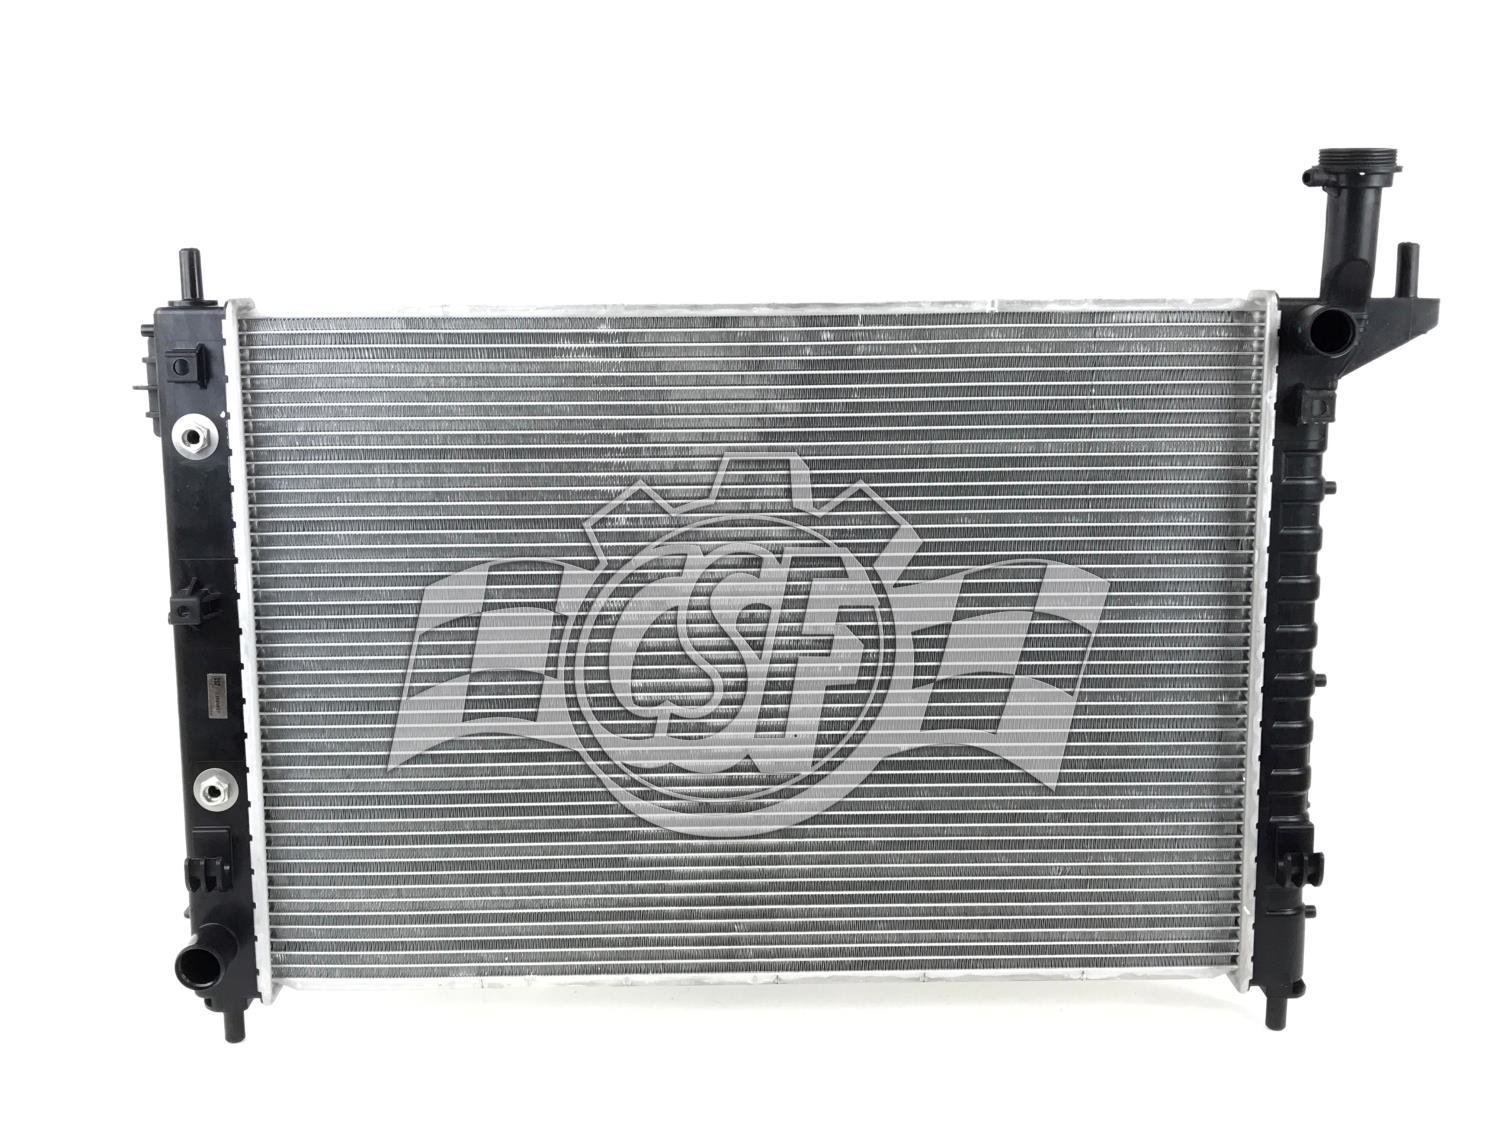 OE-Style 1-Row Radiator, GMC Acadia, Buick Enclave, GMC Acadia Limited, Saturn Outlook, Chevy Traverse